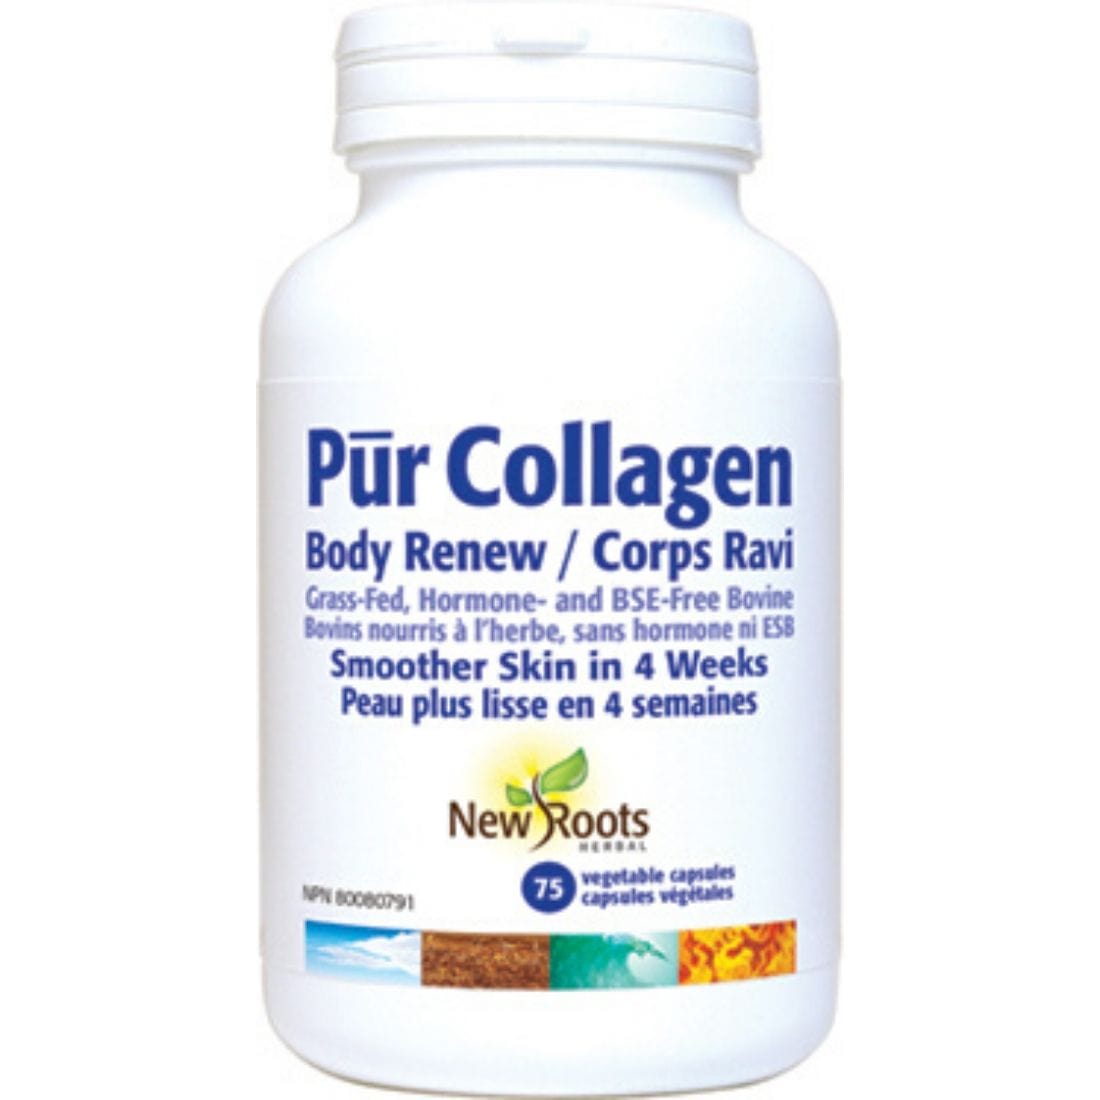 New Roots Pur Collagen Body Renew (Smoother Skin in 4 Weeks)